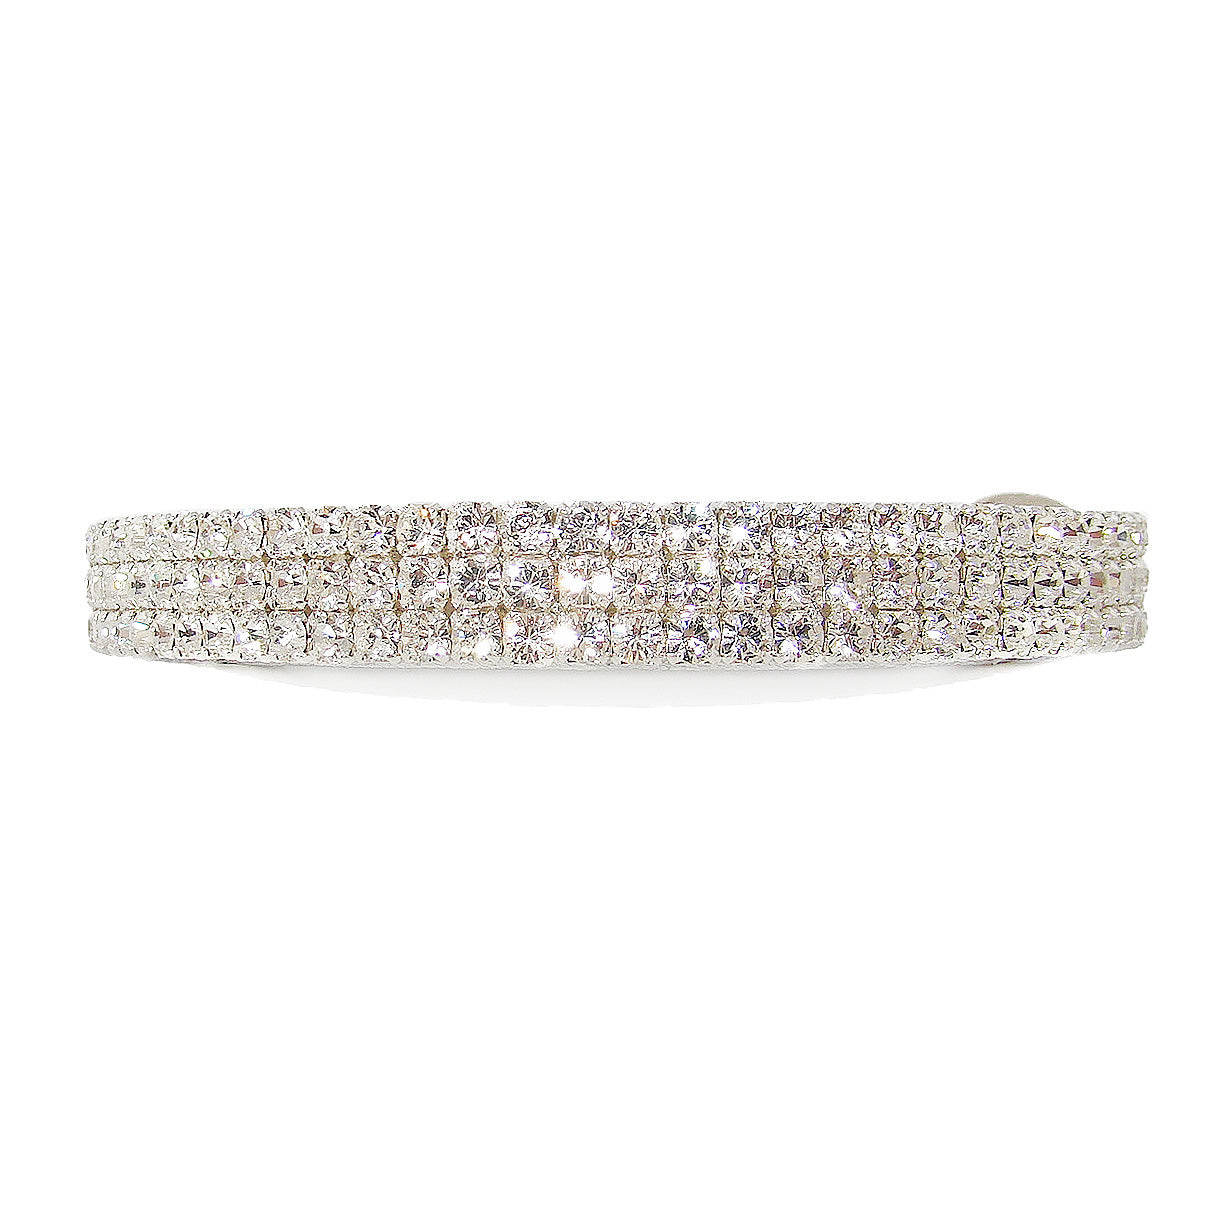 Bling In Crystal Diamonds Cat Collar | The Kitty Bling Boutique